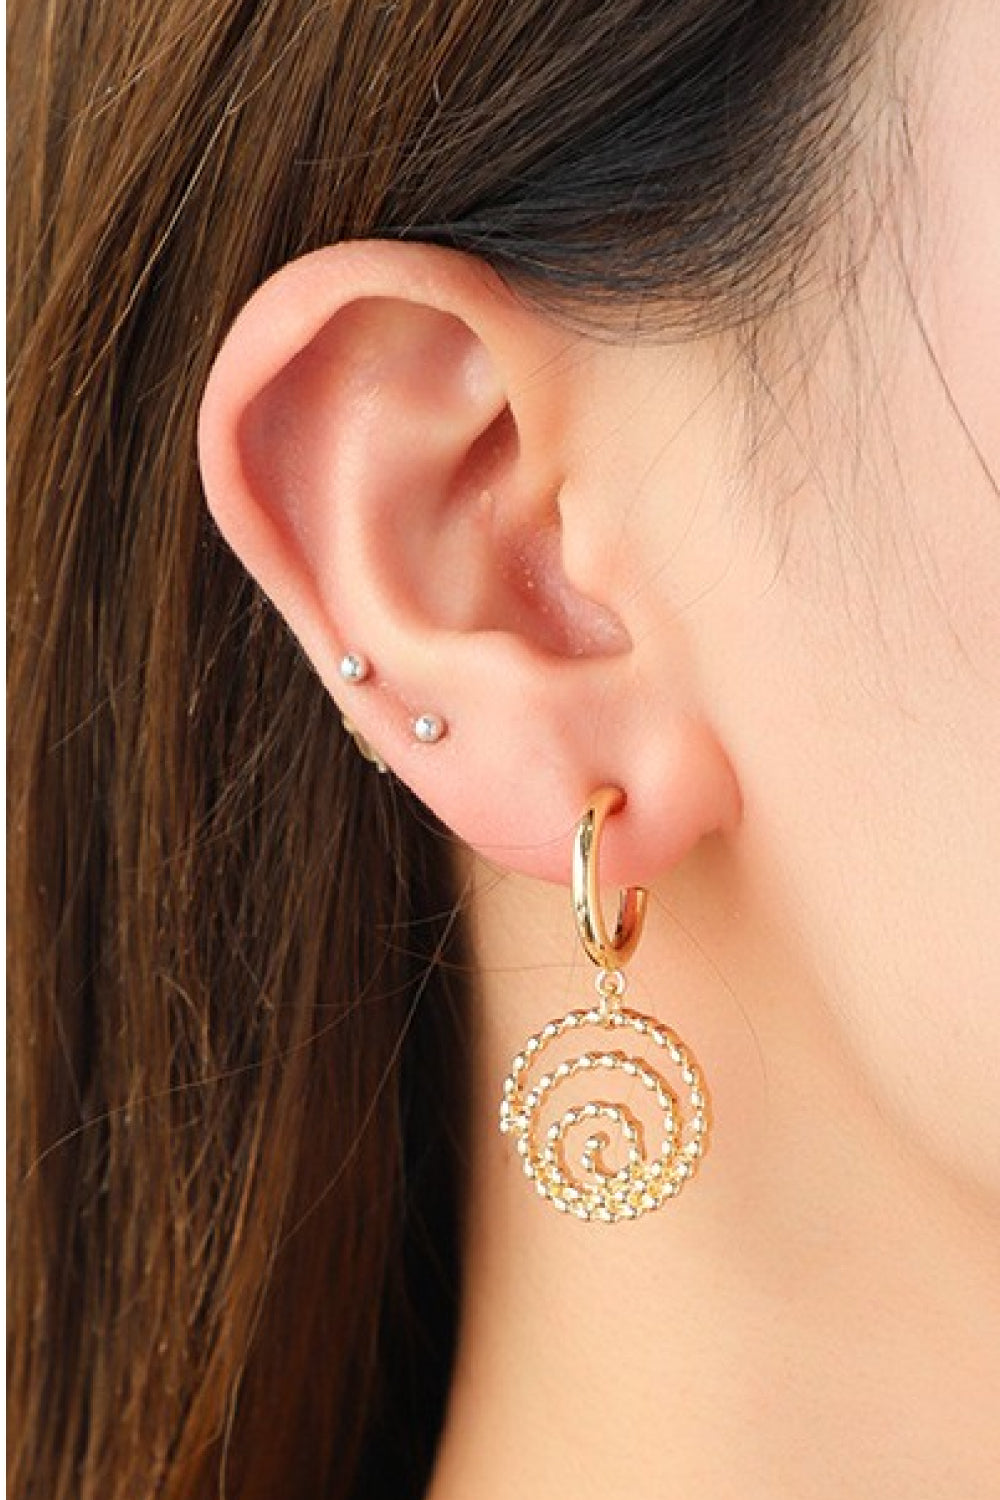 PREORDER- 18K Gold-Plated Alloy Spiral Earrings